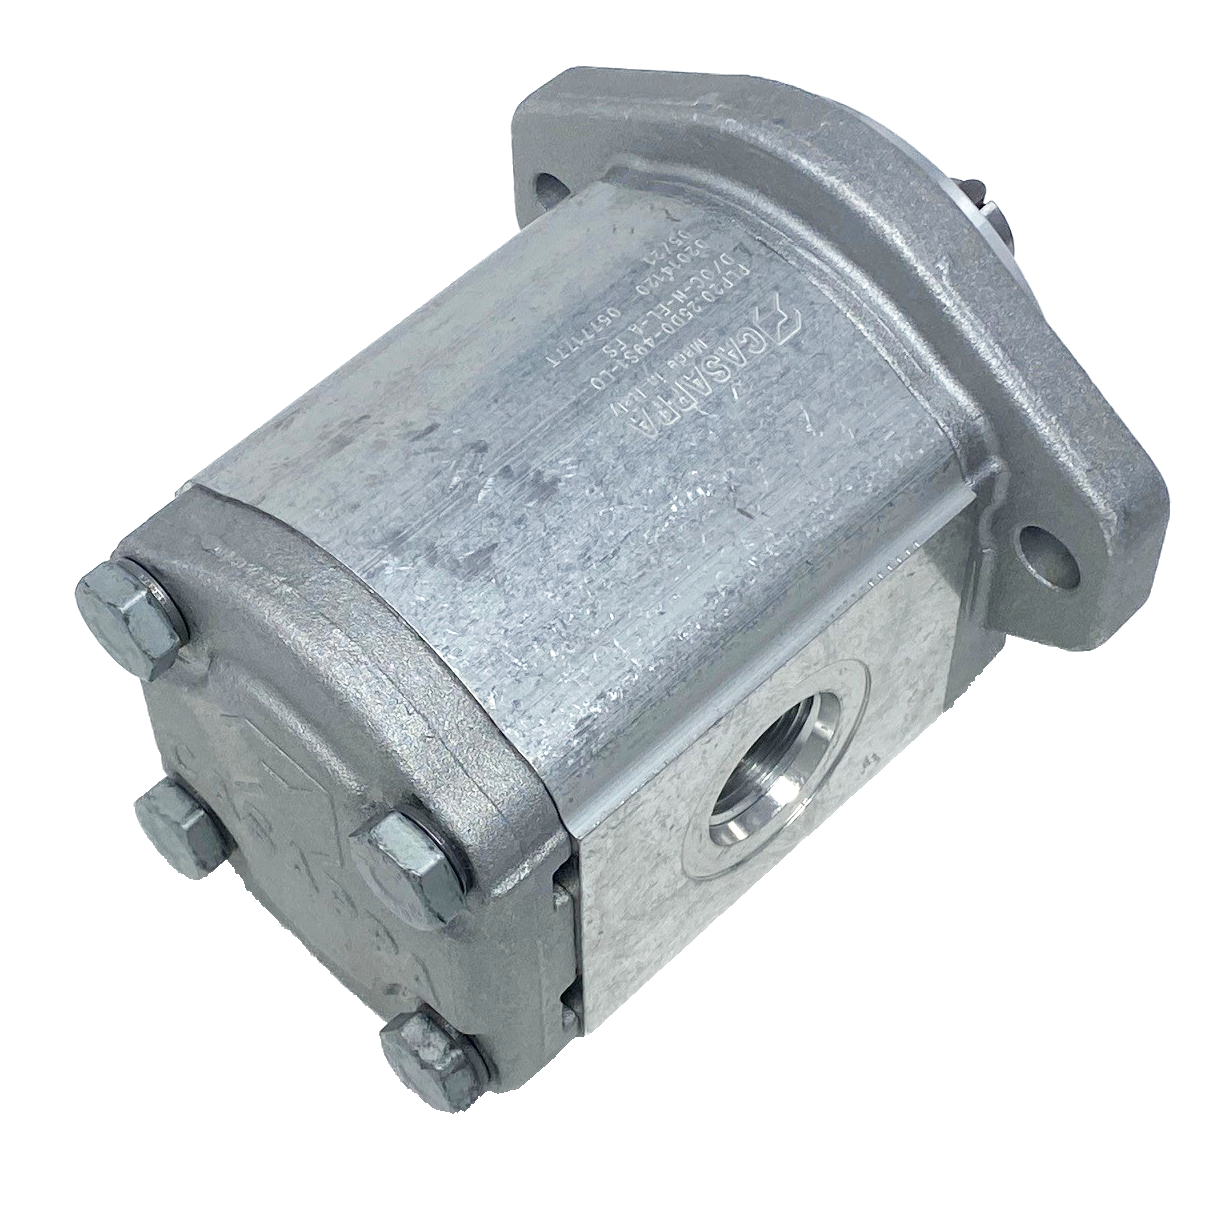 PHP20.27,8S0-50S9-LOG/OC-N-EL : Casappa Polaris Gear Pump, 28.21cc, 2900psi Rated, 2500RPM, CCW, 3/4" Bore x 3/16" Key Shaft, SAE A 2-Bolt Flange, 1.25" #20 SAE Inlet, 0.625 (5/8") #10 SAE Outlet, Cast Iron Body, Aluminum Flange